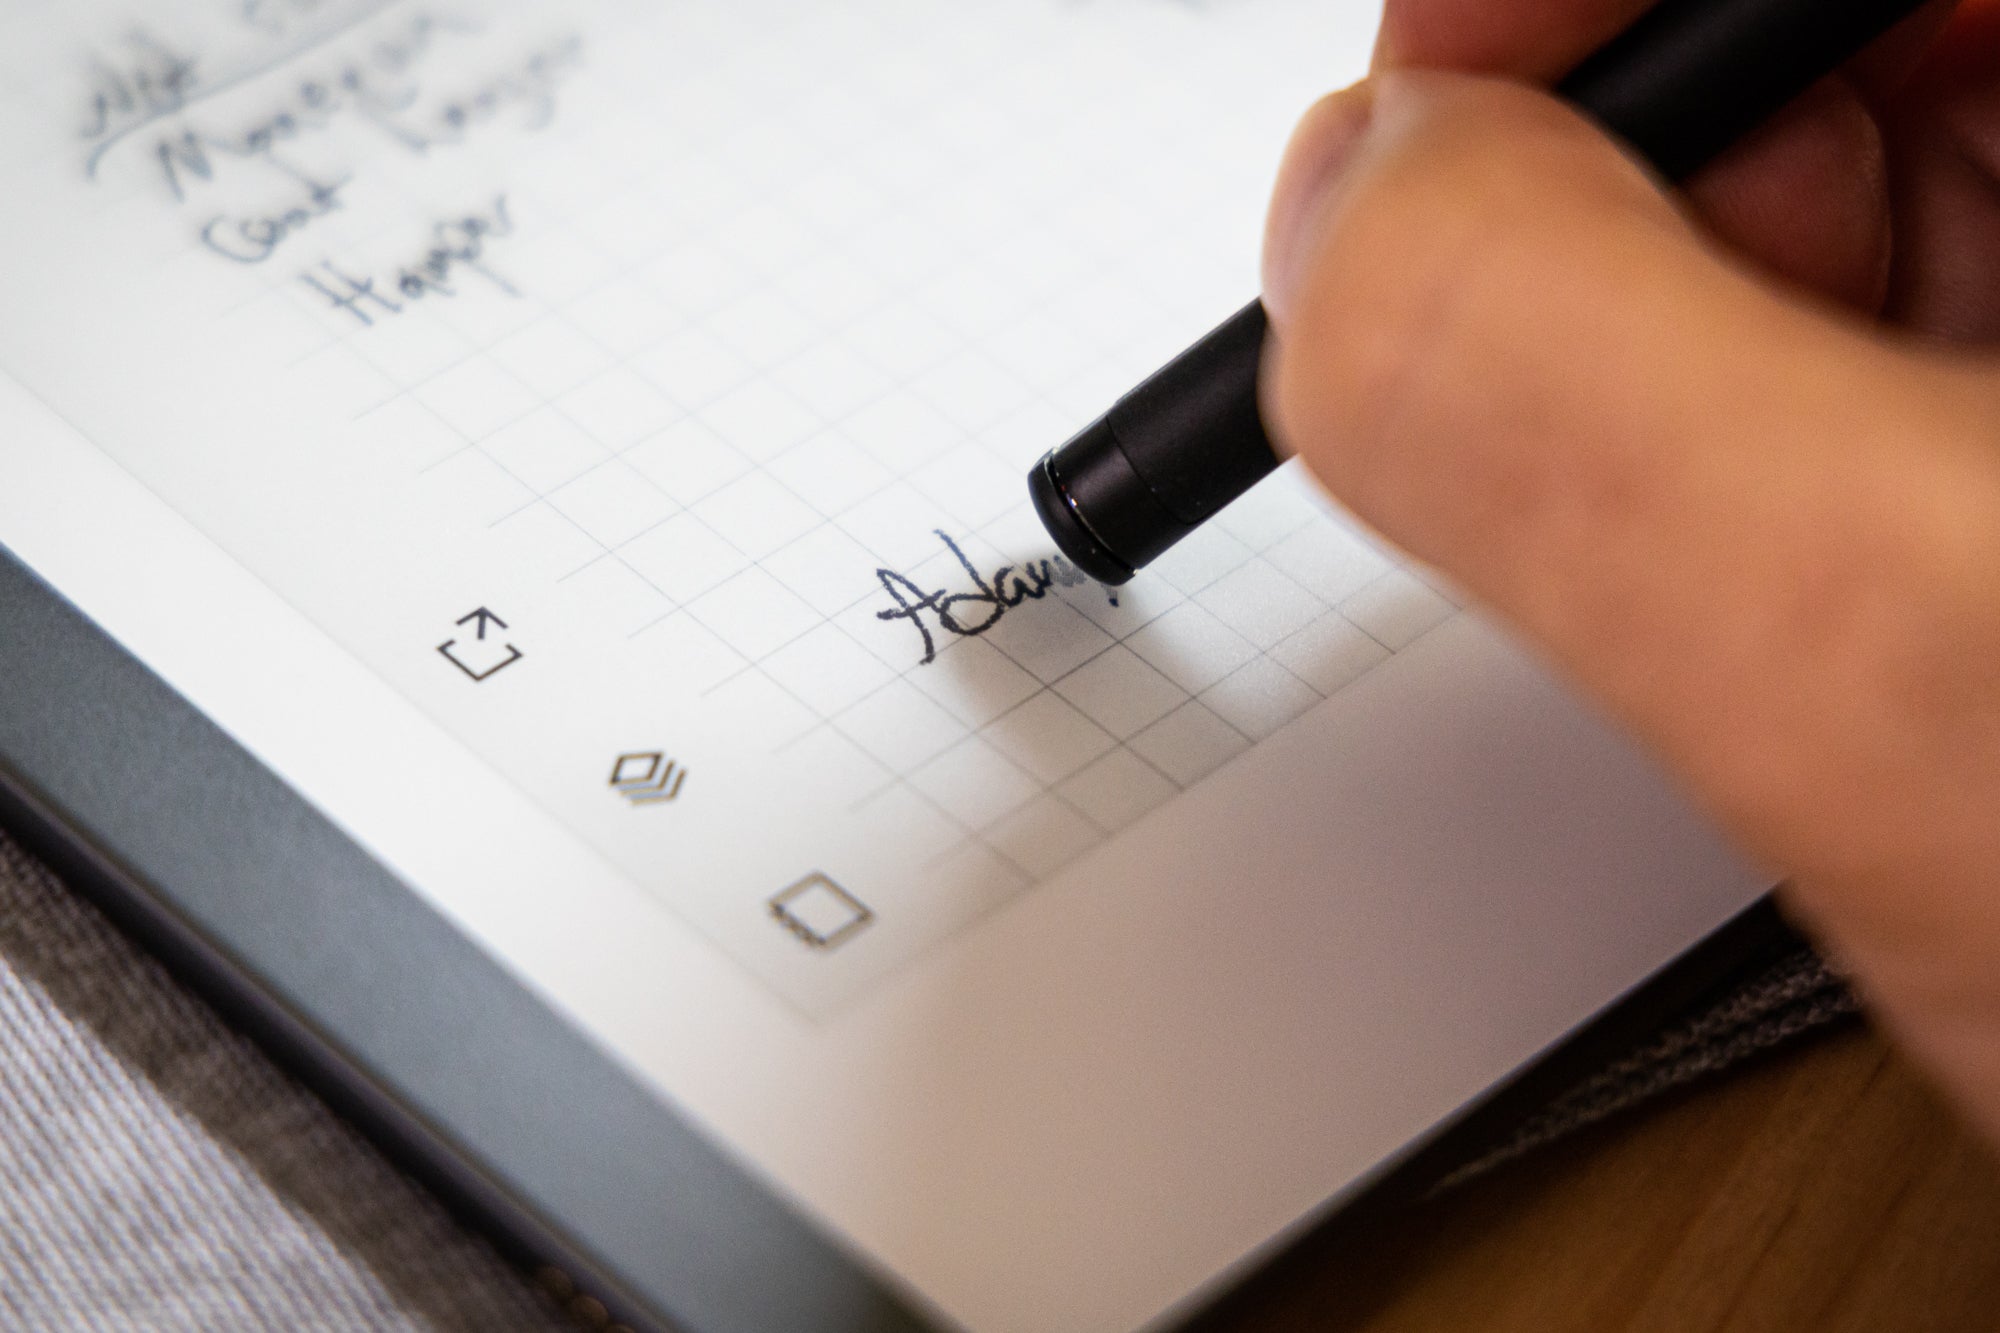 reMarkable 2 review: A ‘paper tablet’ that can replace notebooks | Macworld